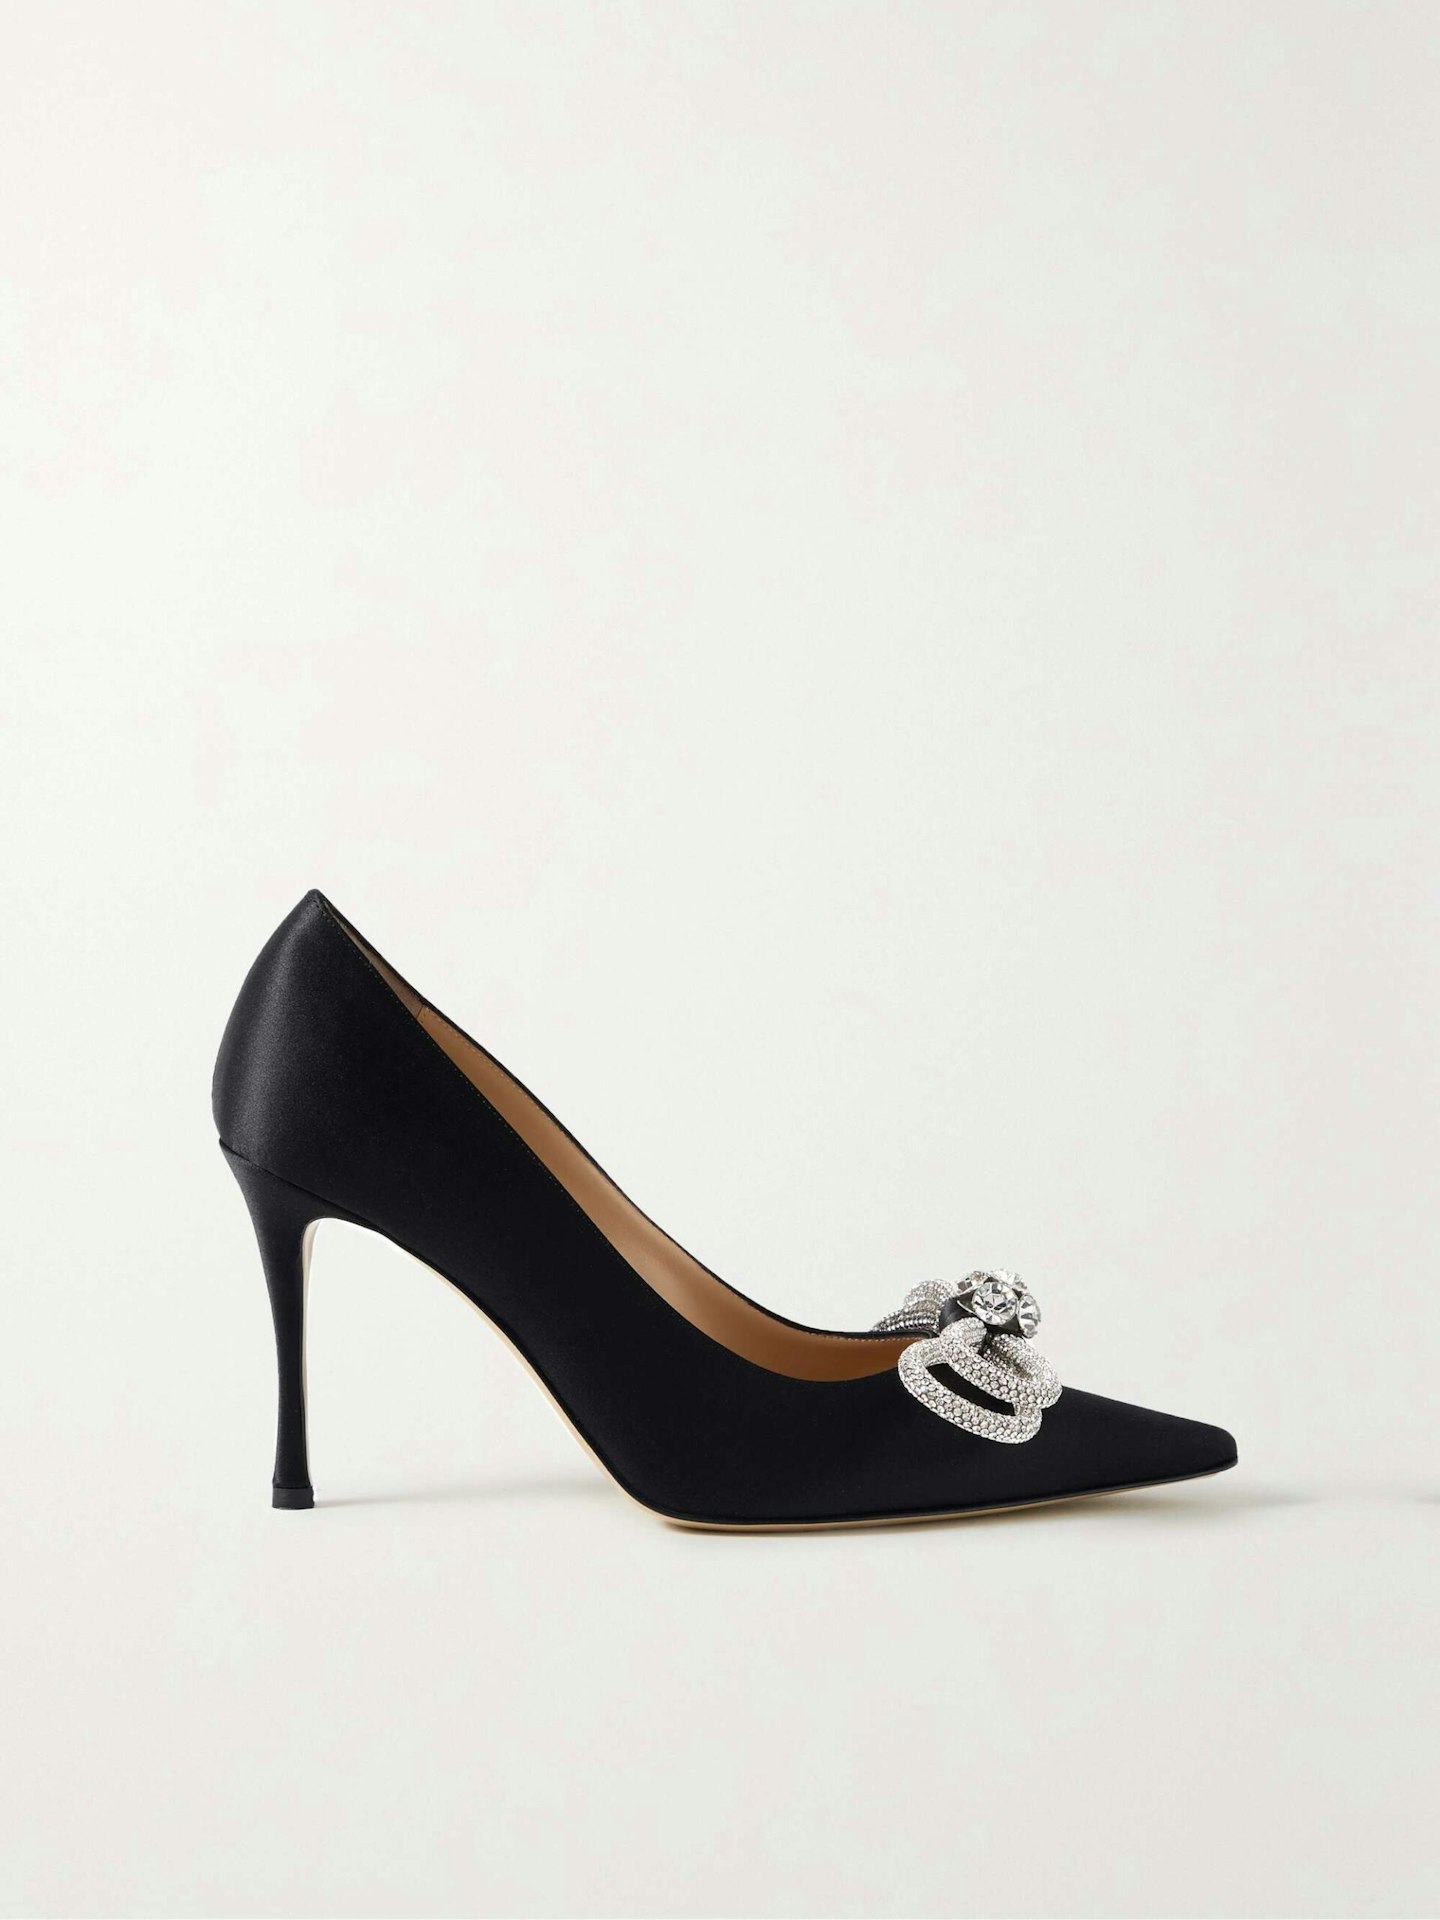 Mach & Mach, Double Bow Crystal-Embellished Satin Poe-Toe Pumps